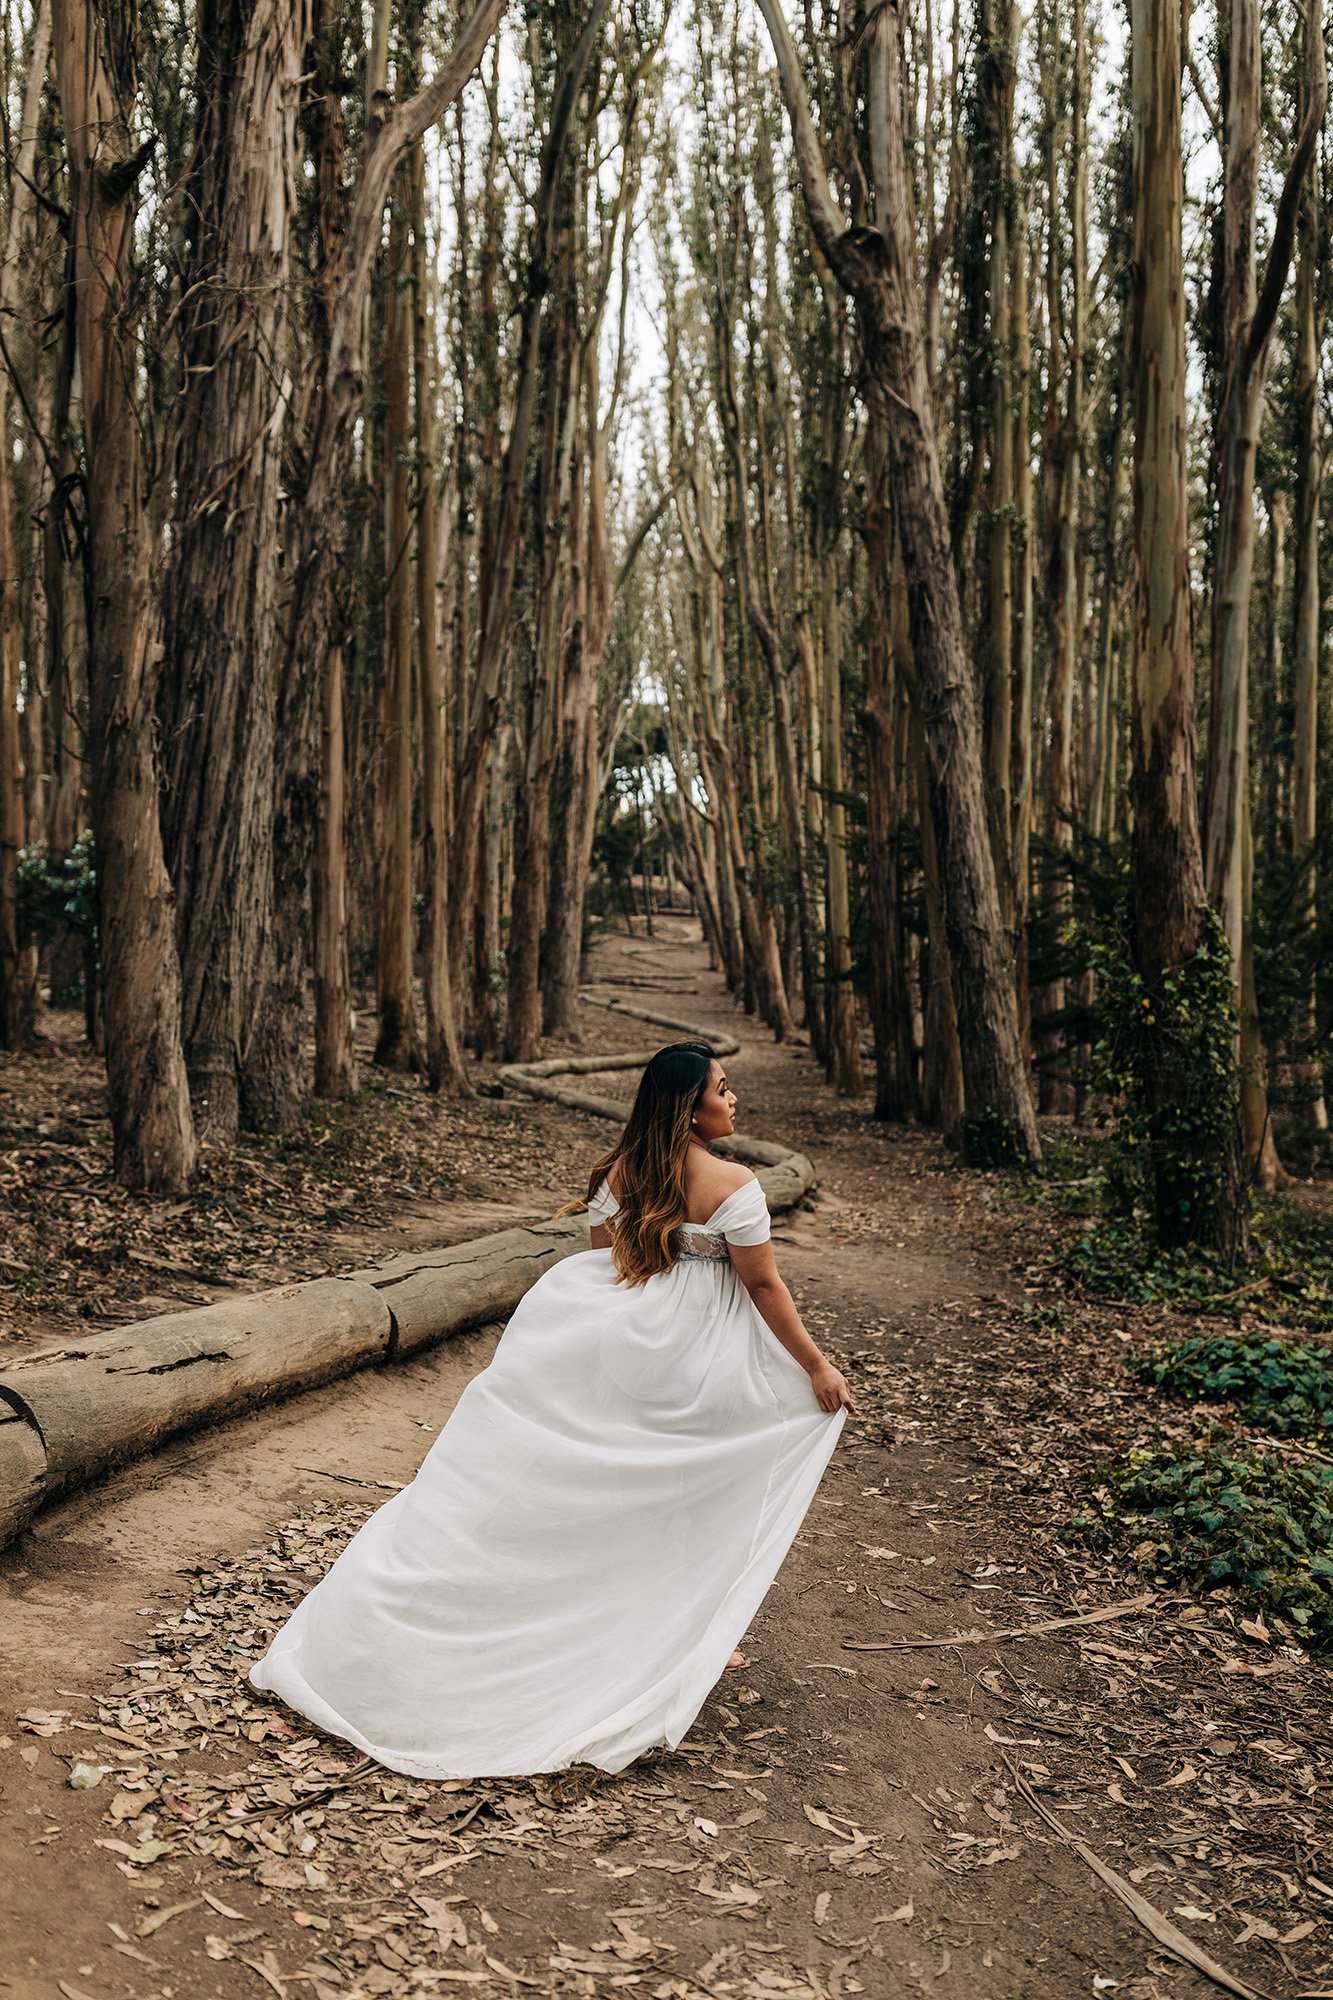 A pregnant woman walks through an iconic forest in San Francisco.